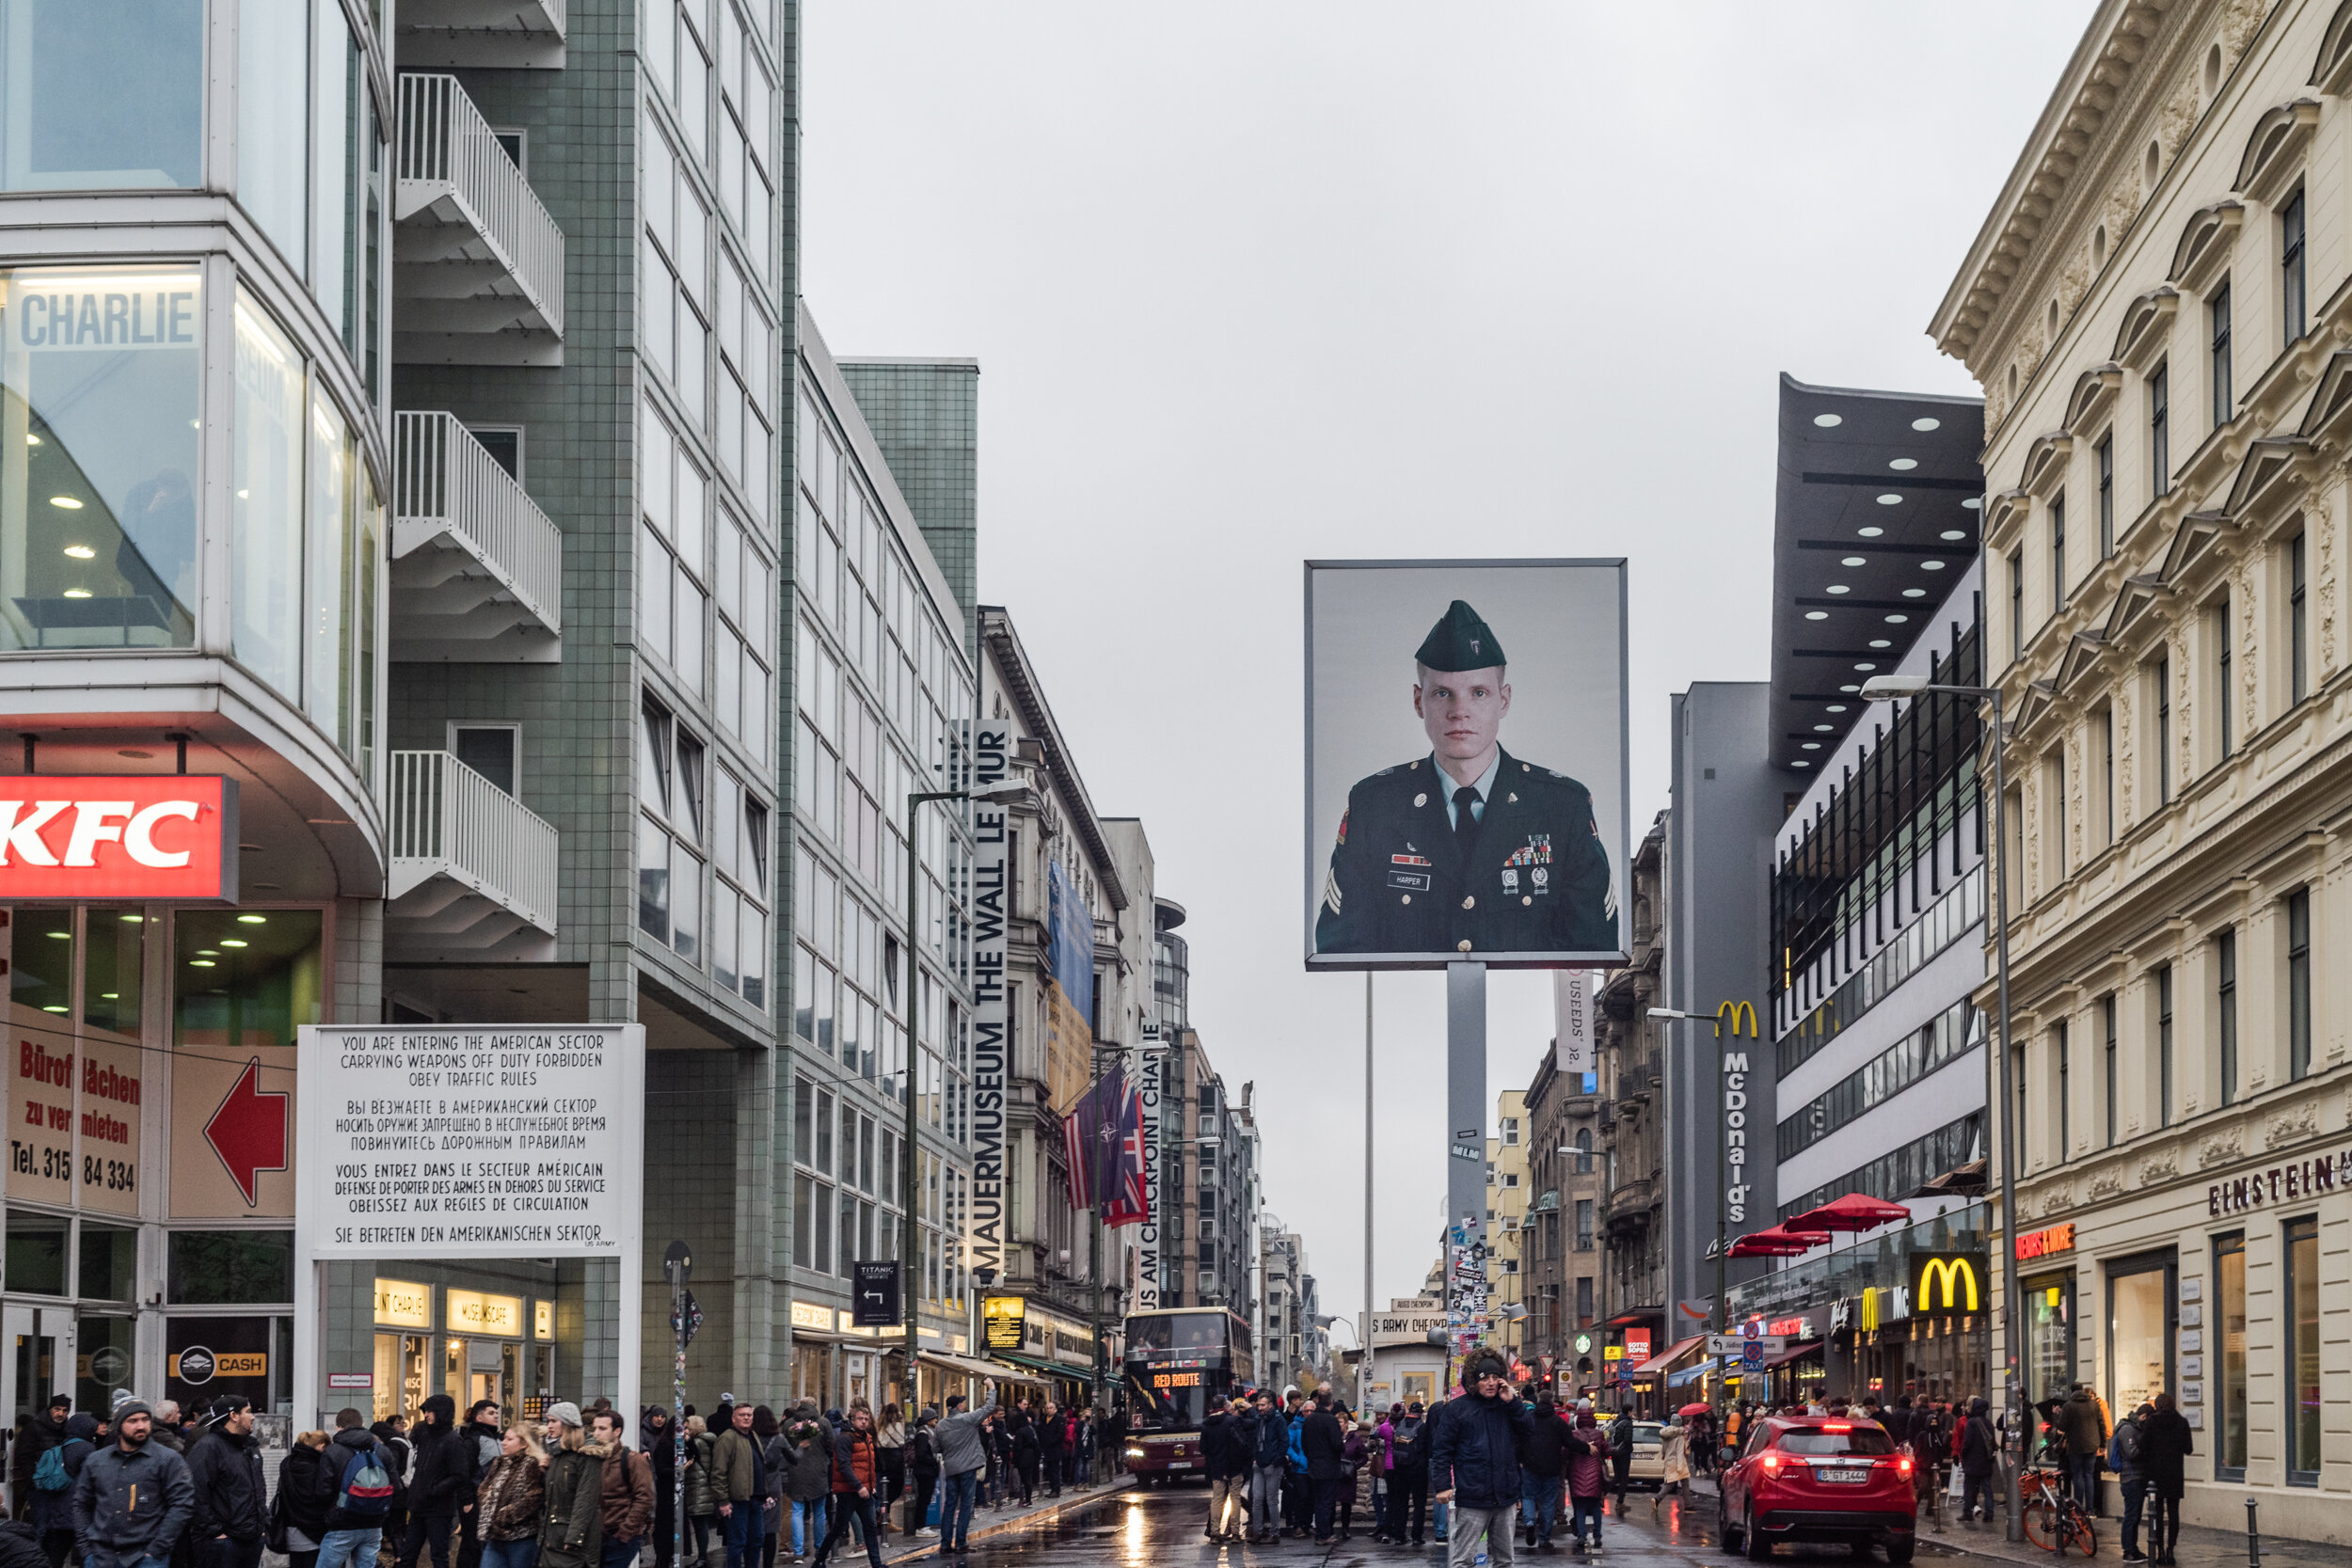  Checkpoint Charlie was the best-known Berlin Wall crossing point between East Berlin and West Berlin during the Cold War. 